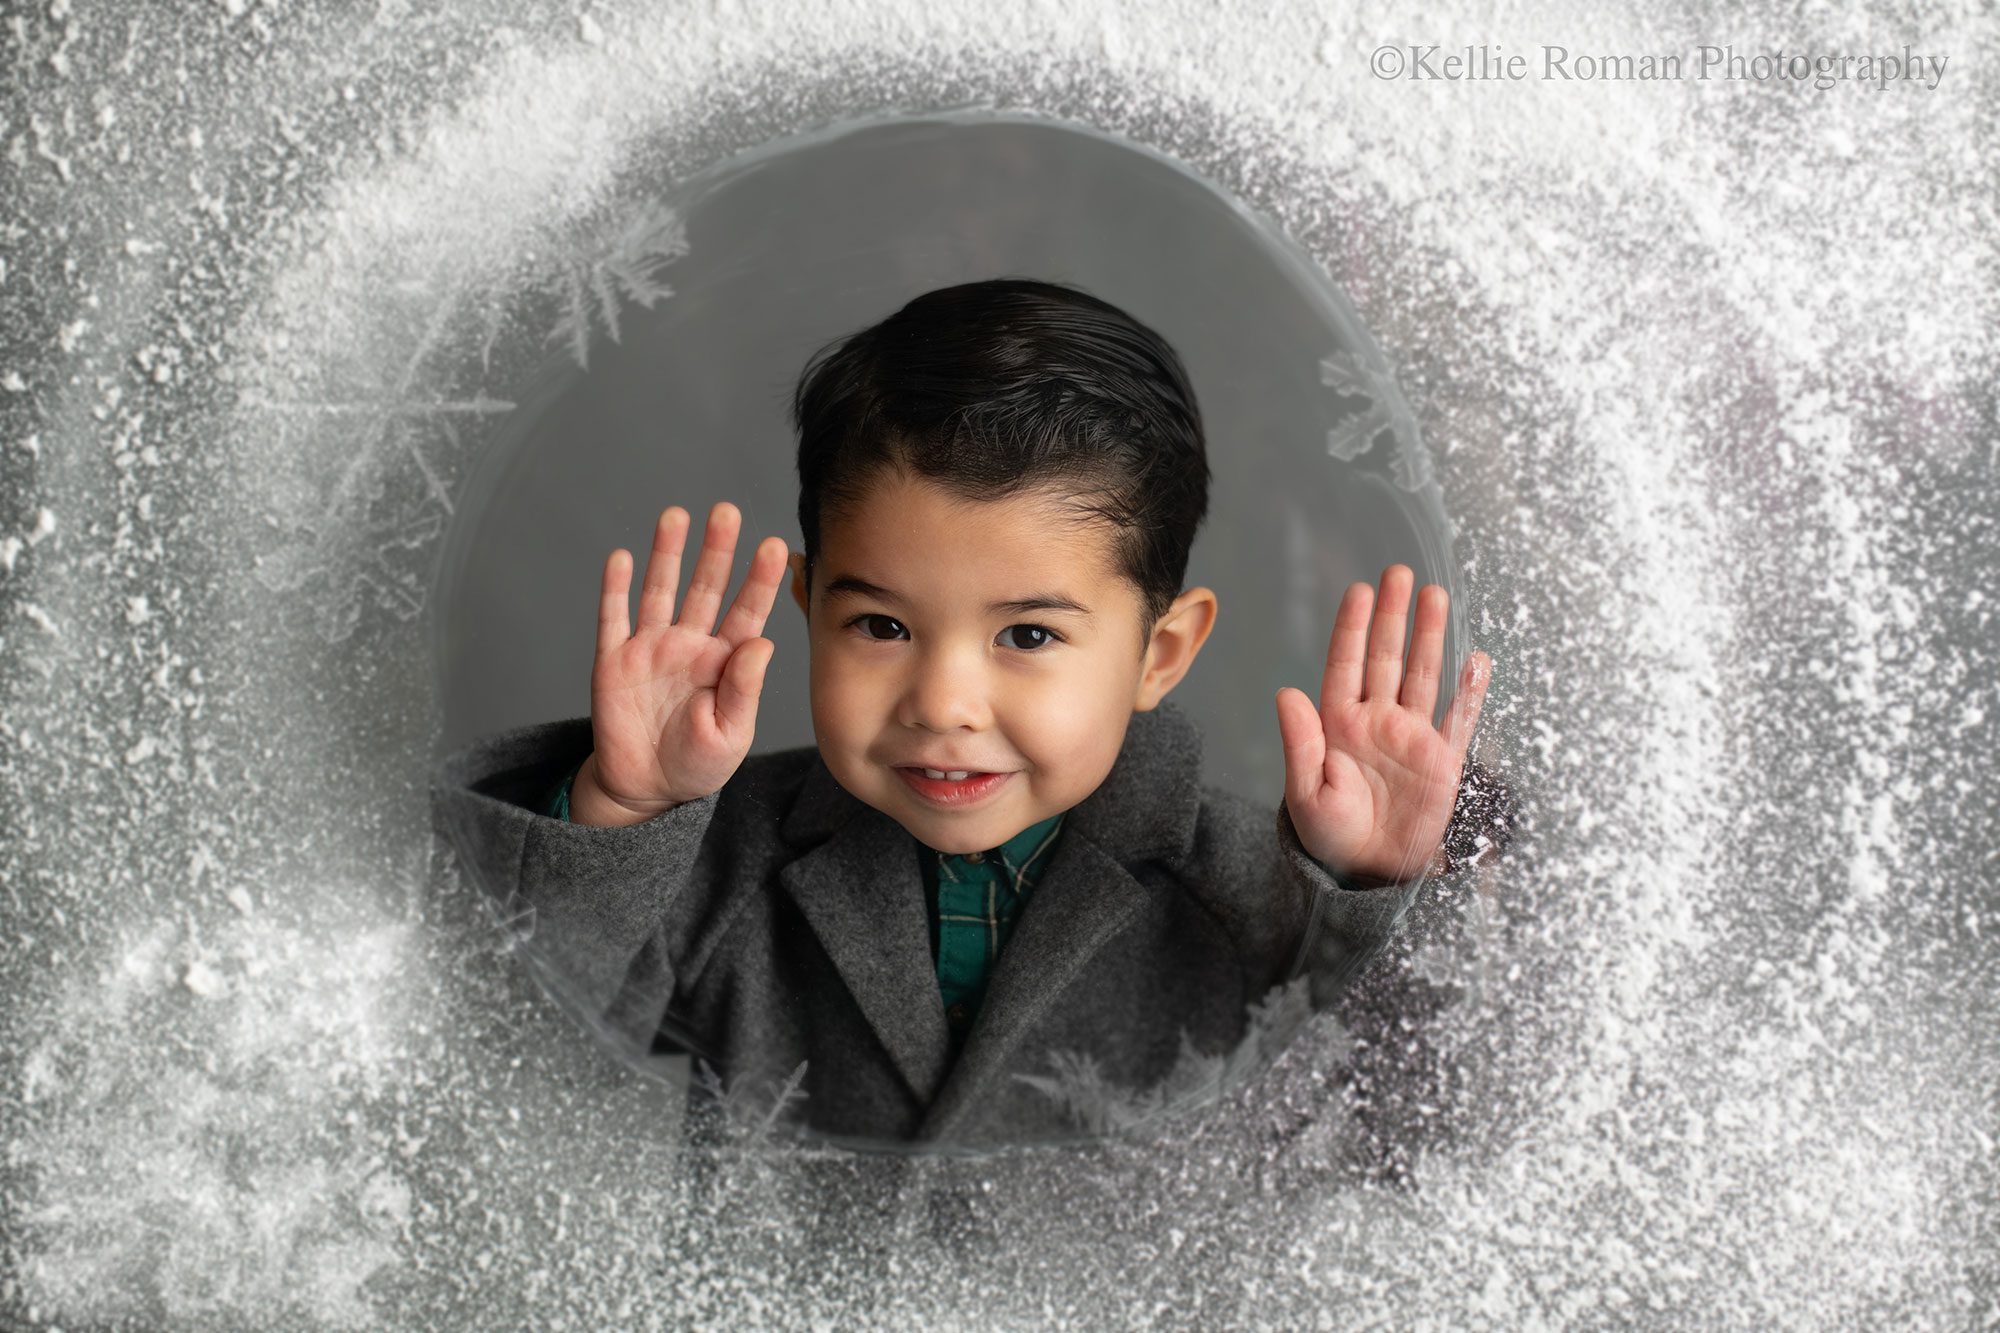 birthday photographer milwaukee. young boy is standing behind glass with snow all over it holding his hands up. he's smiling big, and wearing a grey coat and has black hair.